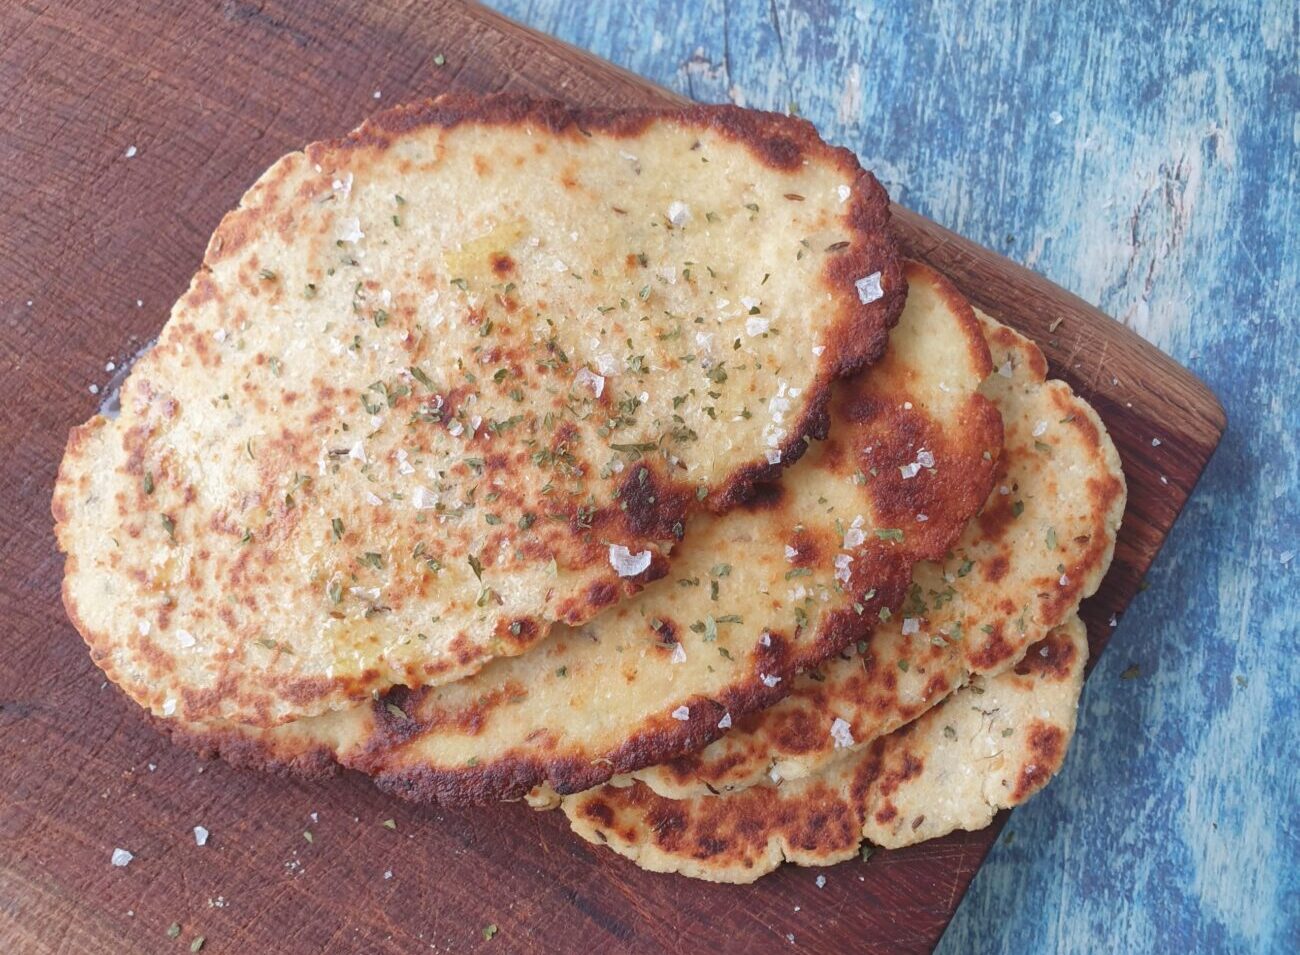 Low Carb Naan Bread